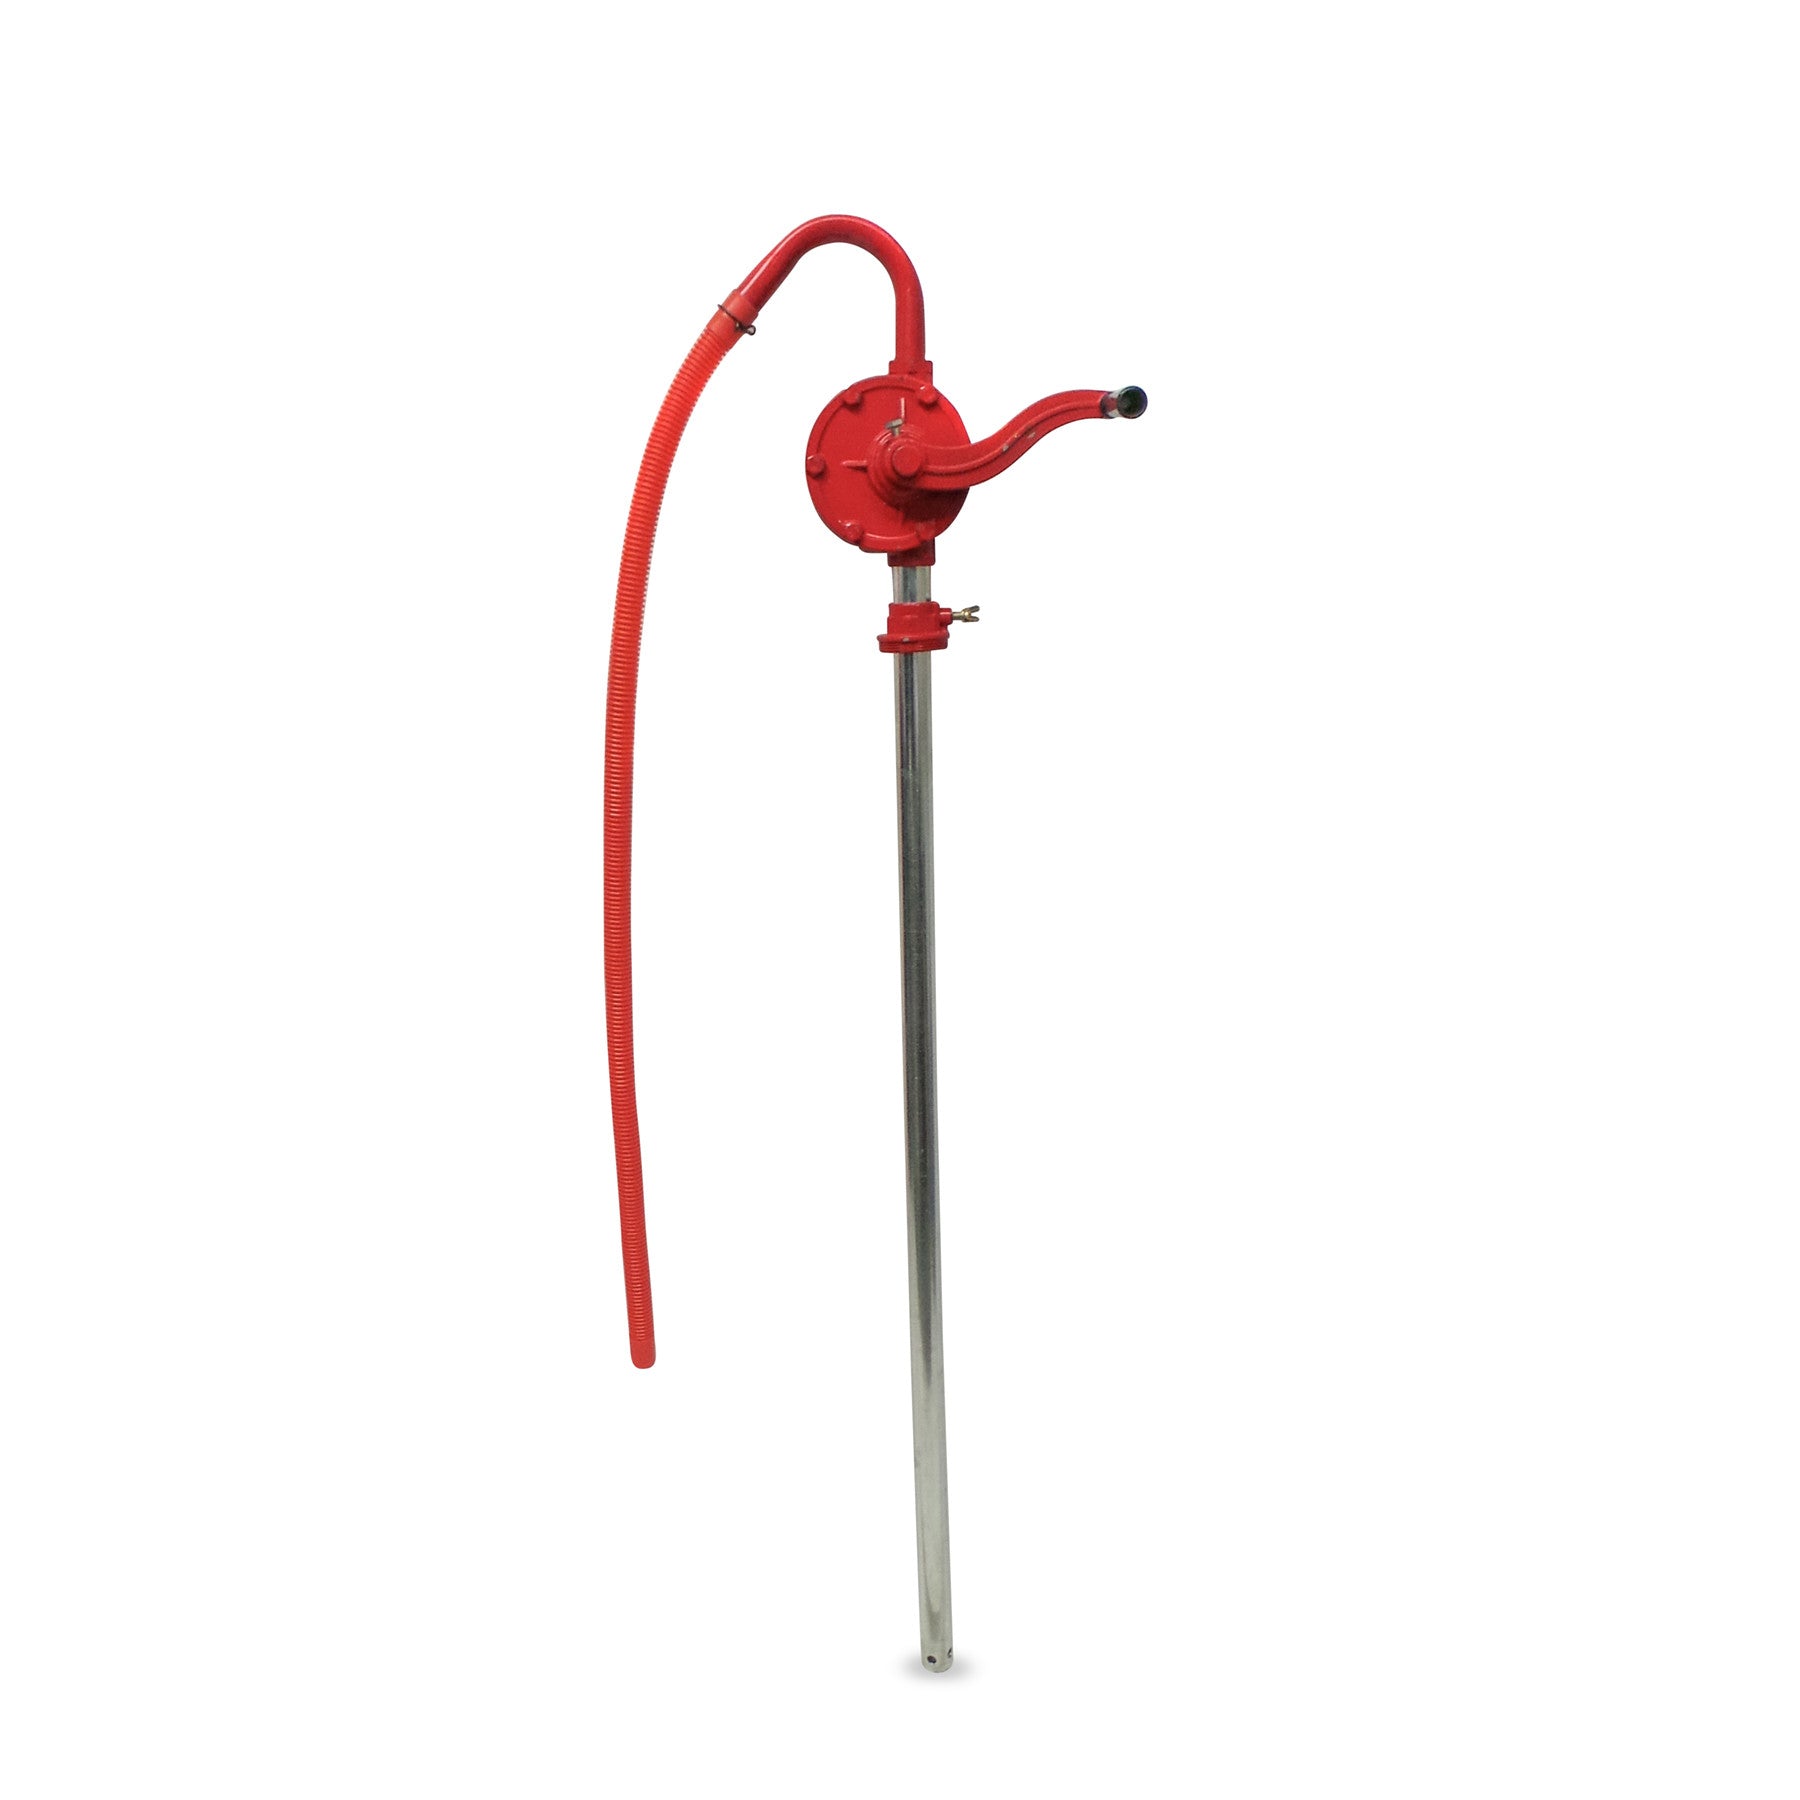 rotary hand drum pump for fuel by Gespasa Australia